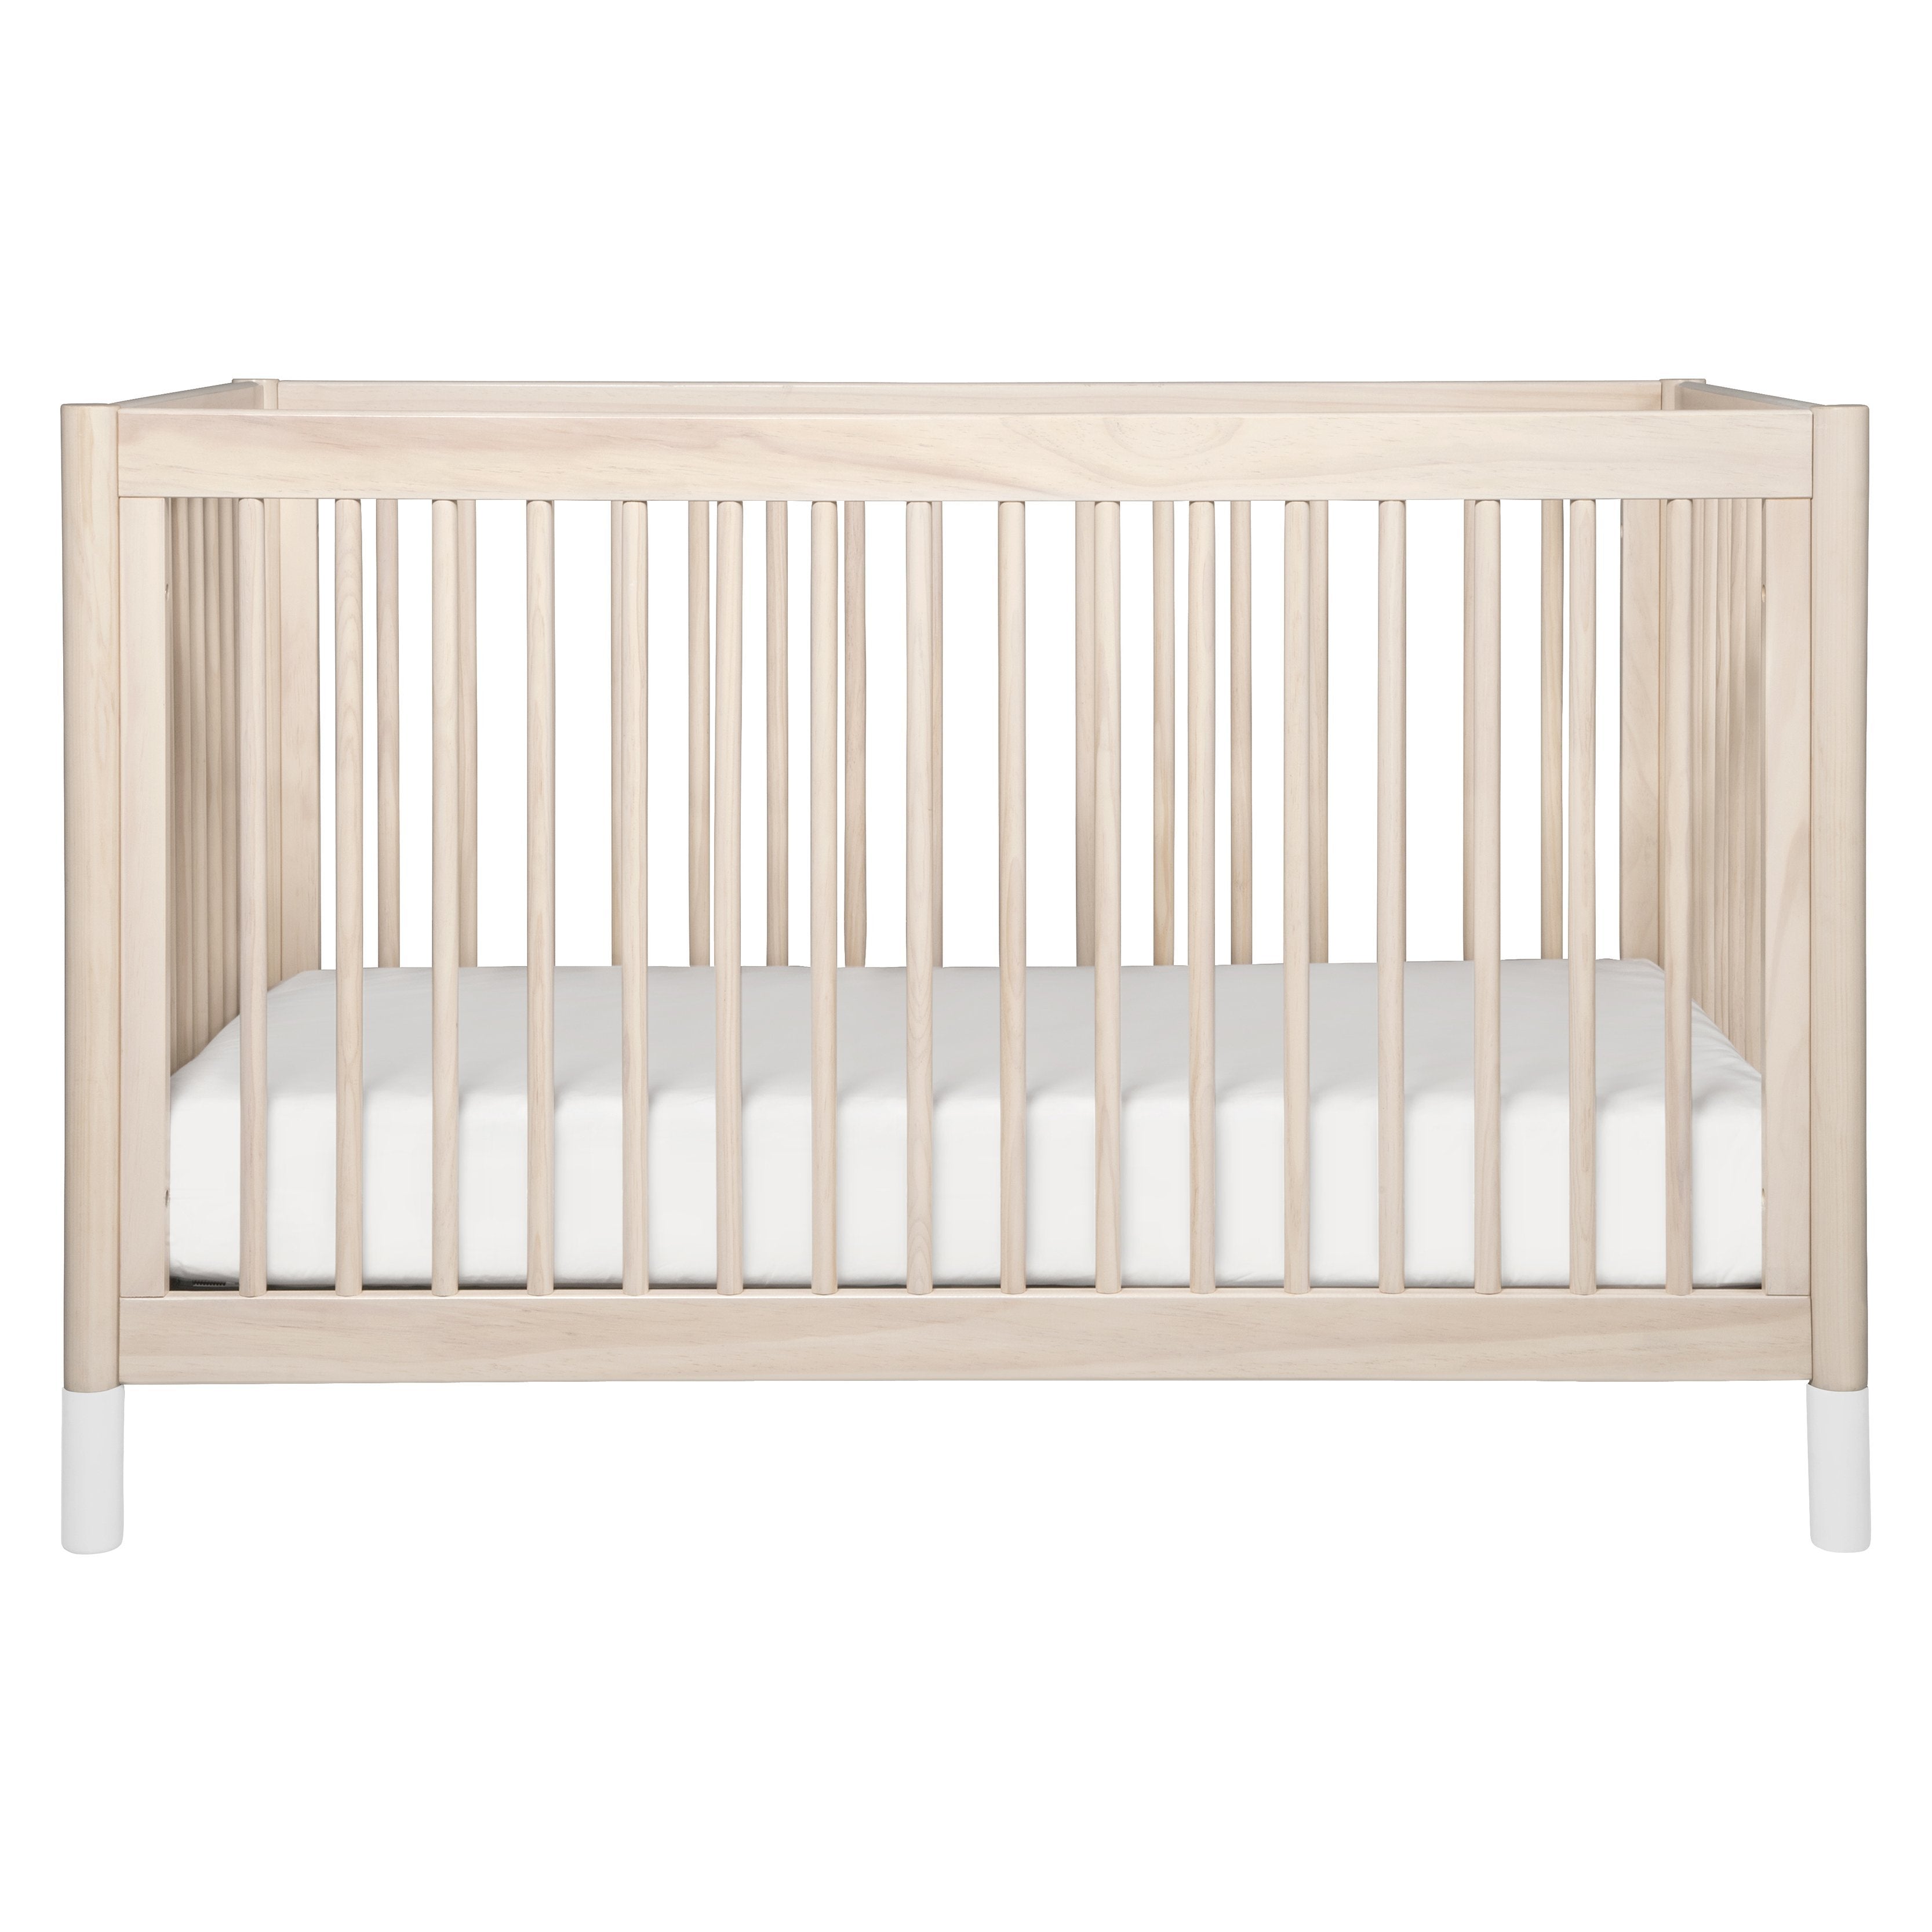 Gelato 4-in-1 Crib With Toddler Bed Conversion Kit